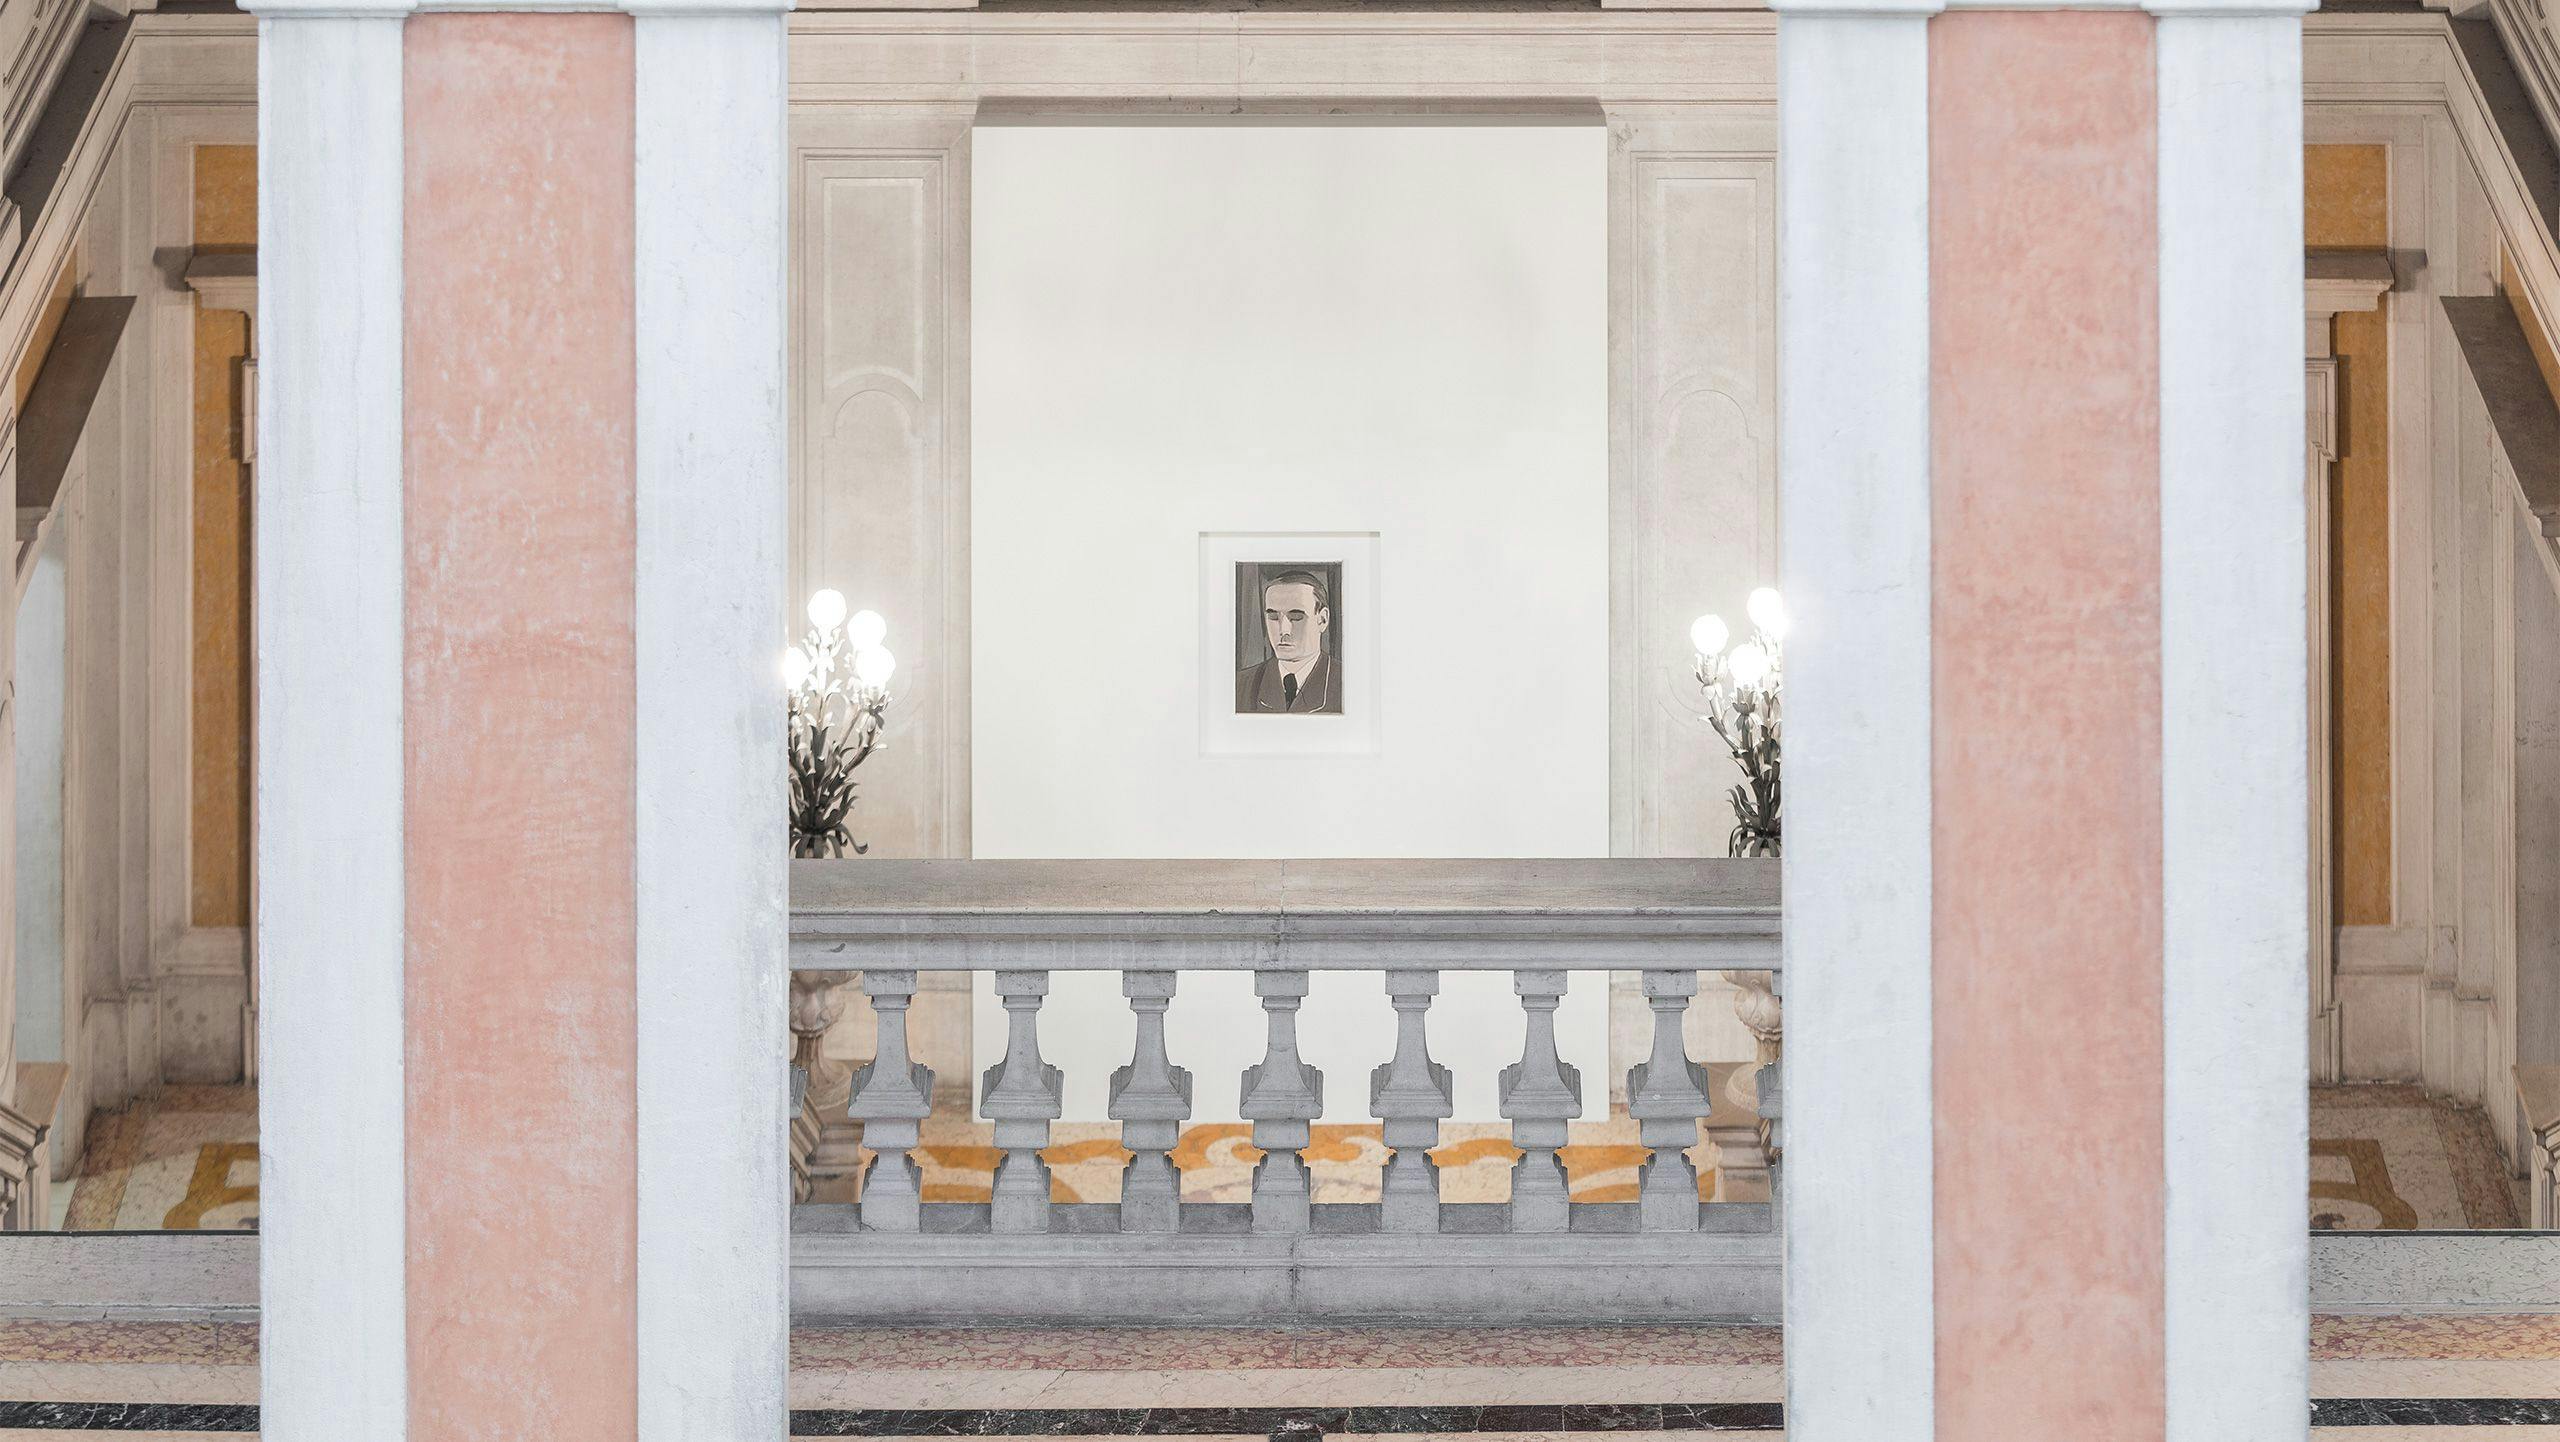 Installation view, Luc Tuymans: La Pelle, Palazzo Grassi, Venice, 2019–2020 Alt text: A painting by Luc Tuymans installed in Venice's Palazzo Grassi